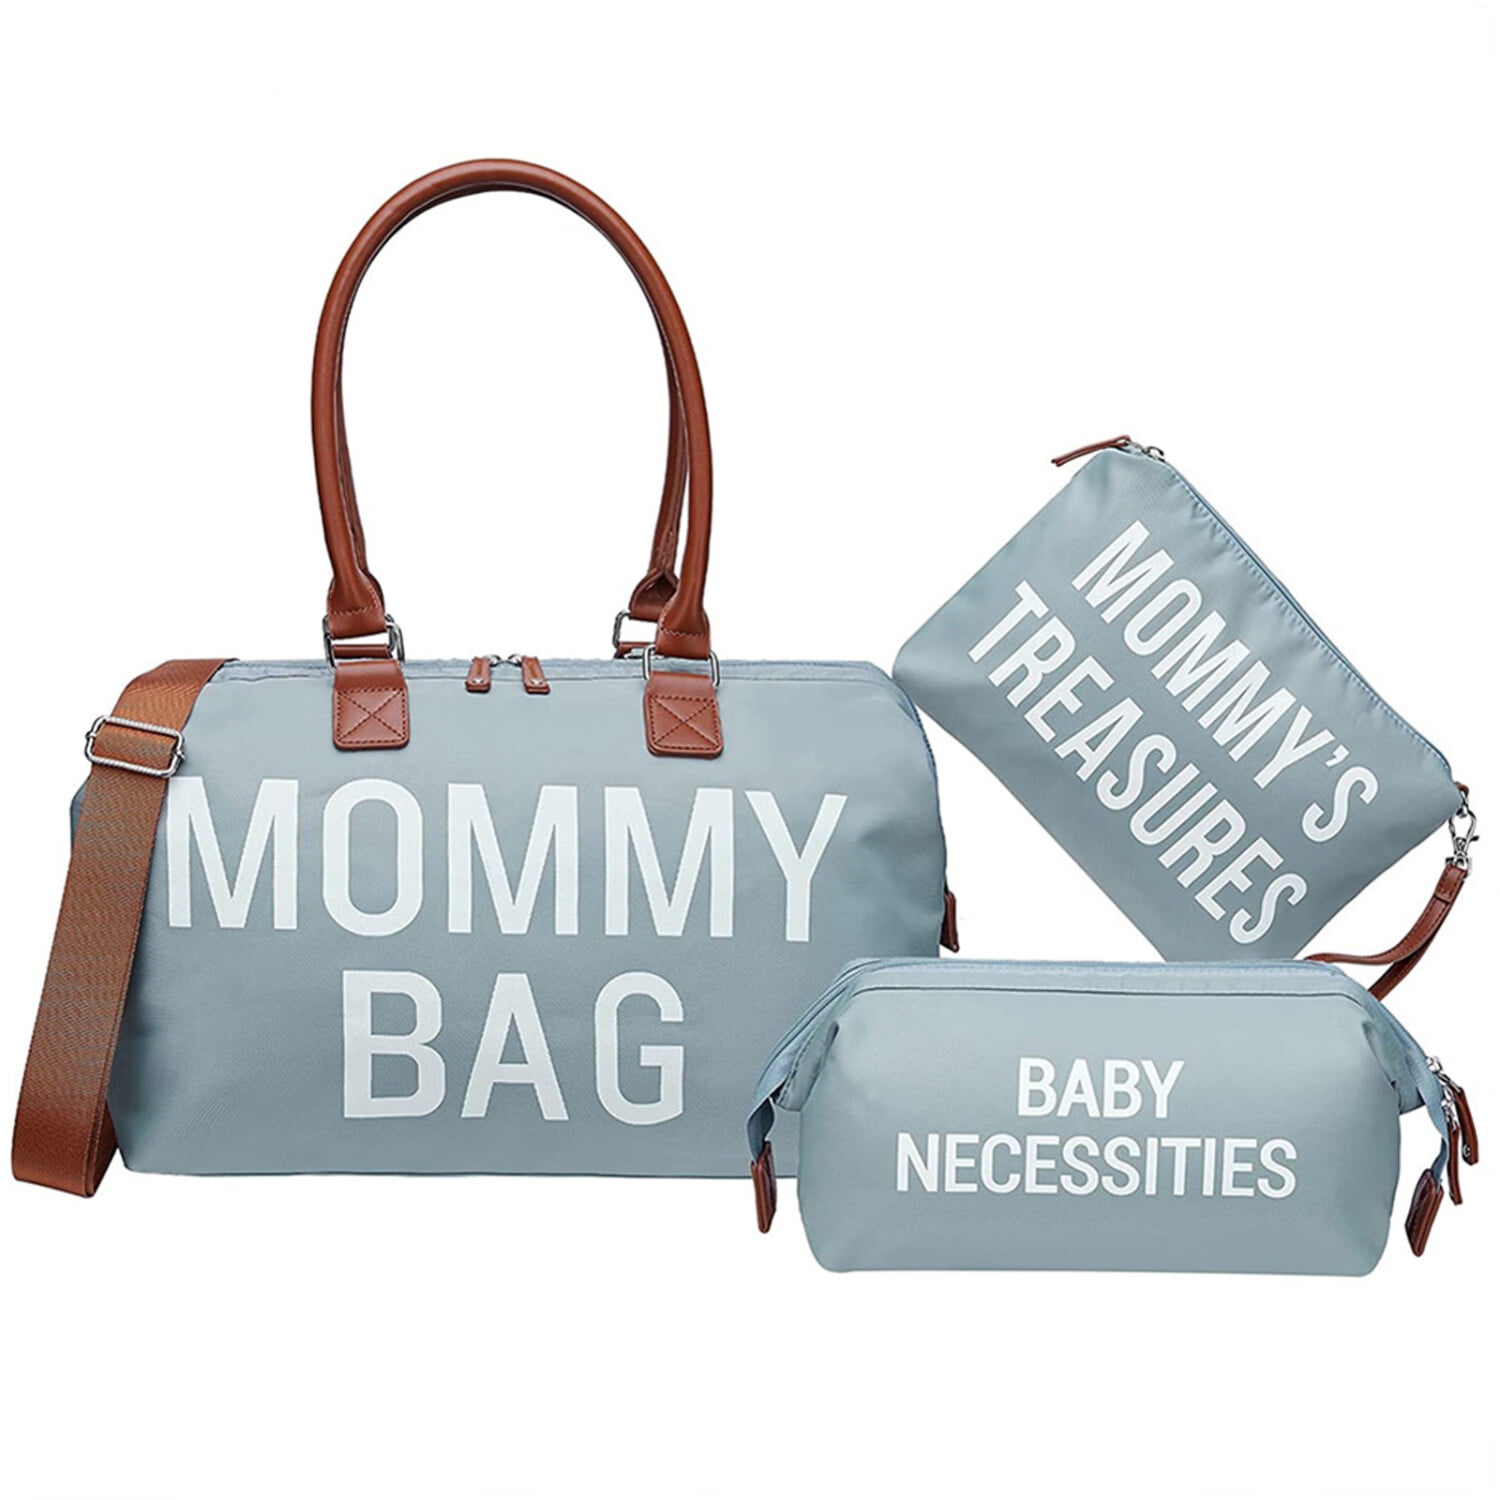 PeraBella Mommy Bag for Hospital Labor and Delivery, Diaper Bag